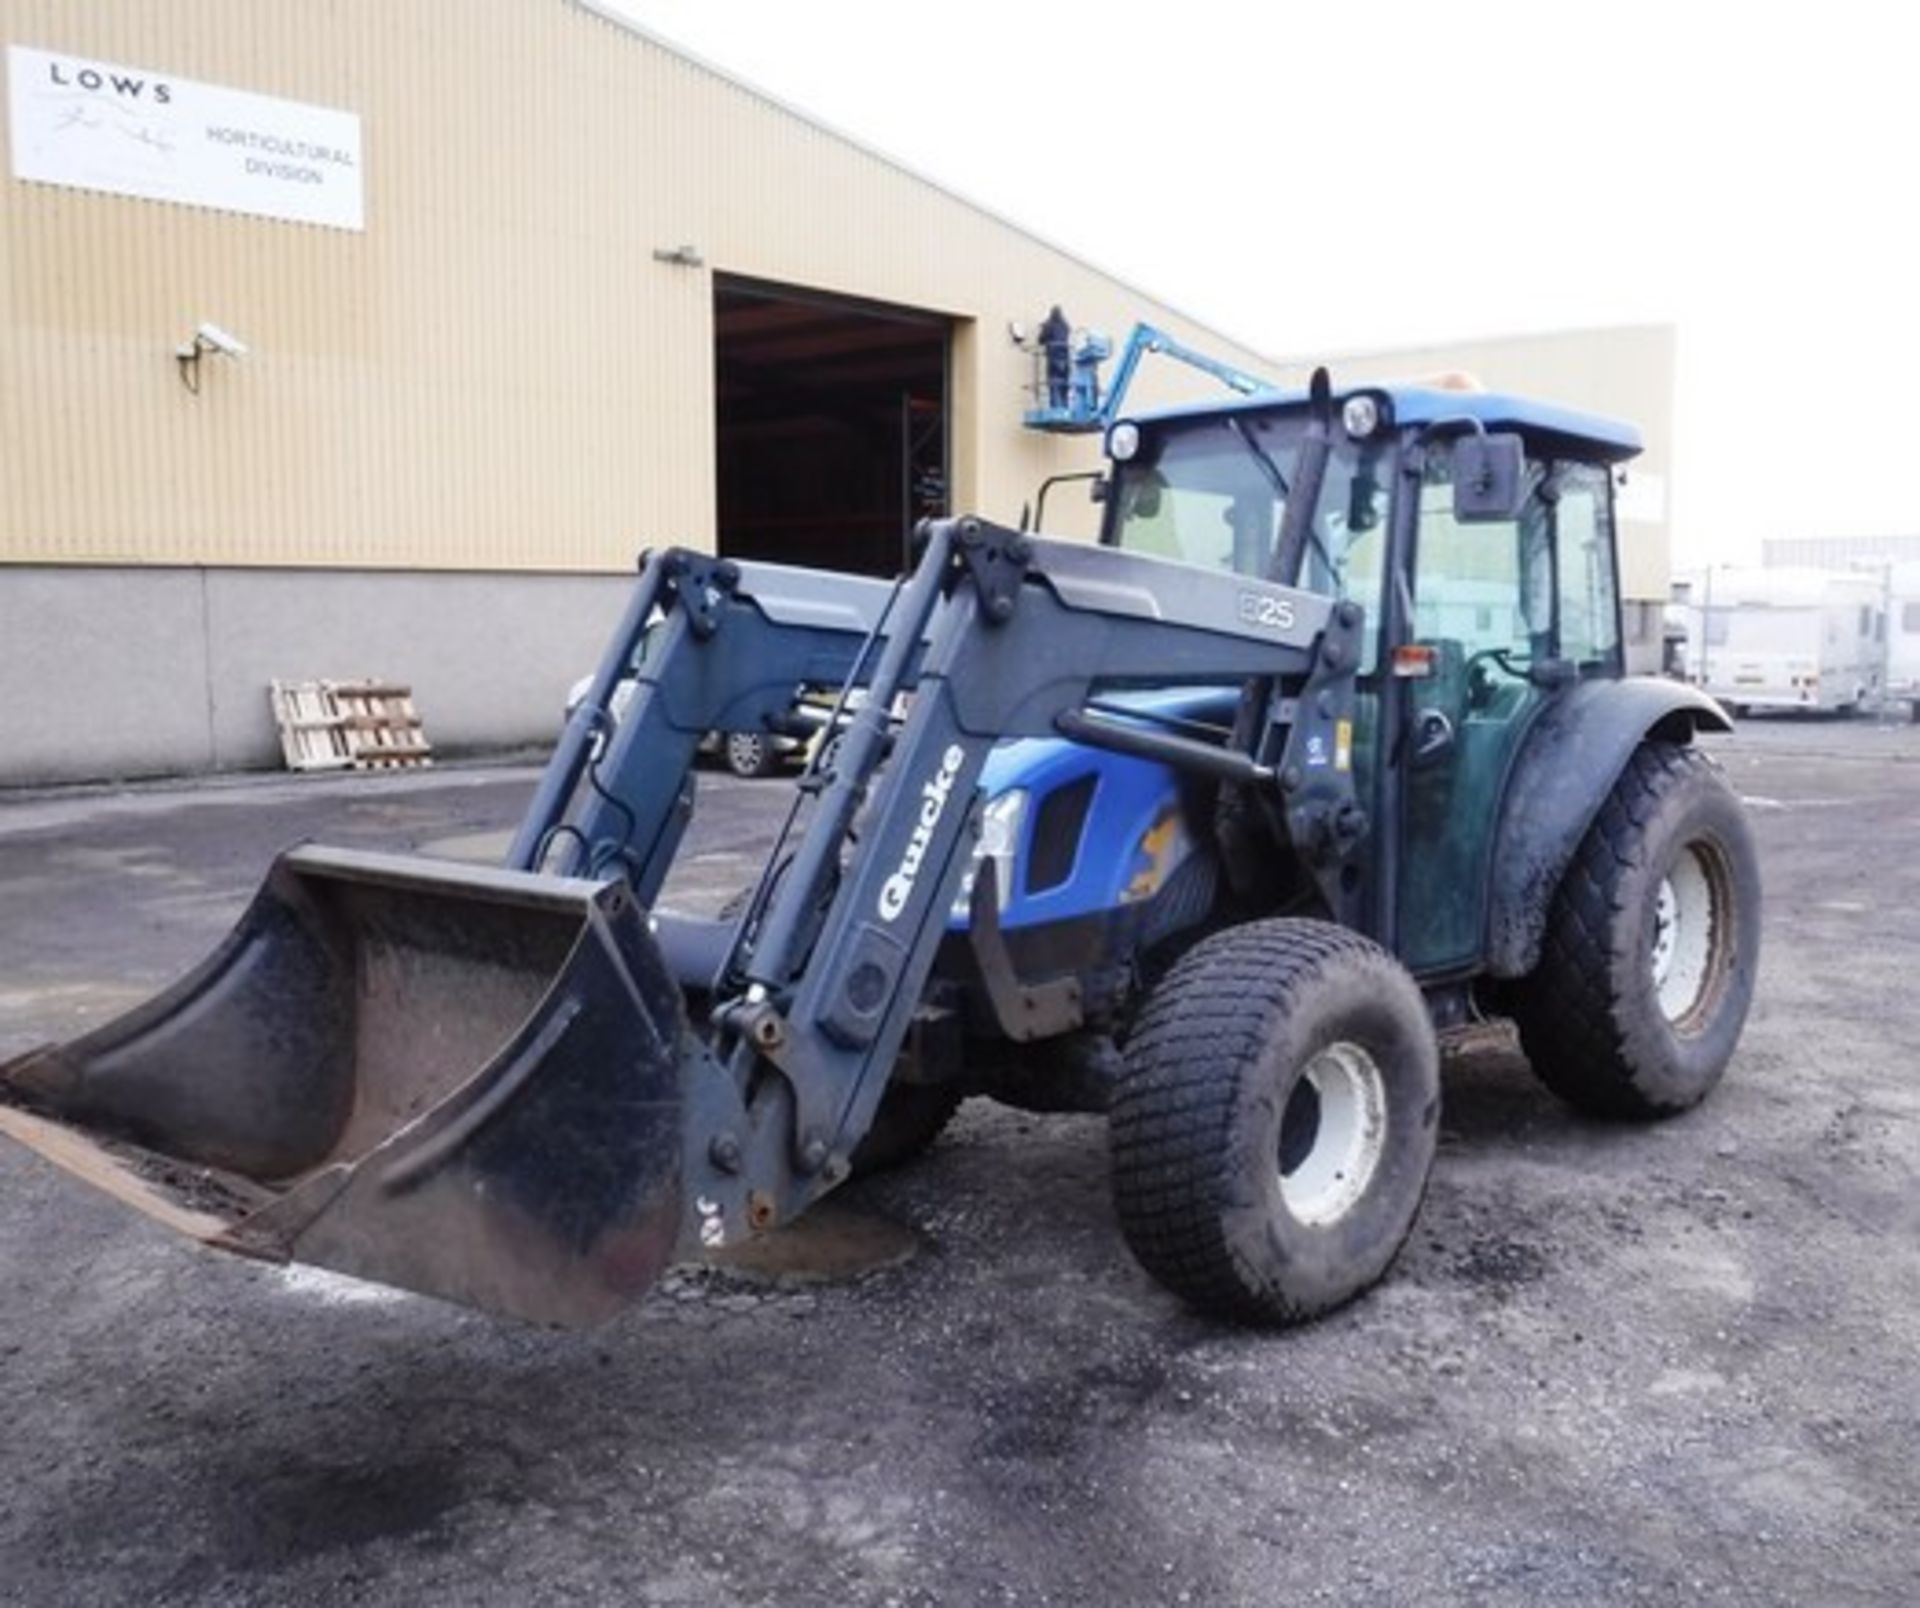 2008 NEW HOLLAND TN60 TRACTOR. REG NO SP08 DWY. SN 111054. GVW(TONNES) 4497, 3062HRS (NOT VERIFIED) - Image 12 of 40